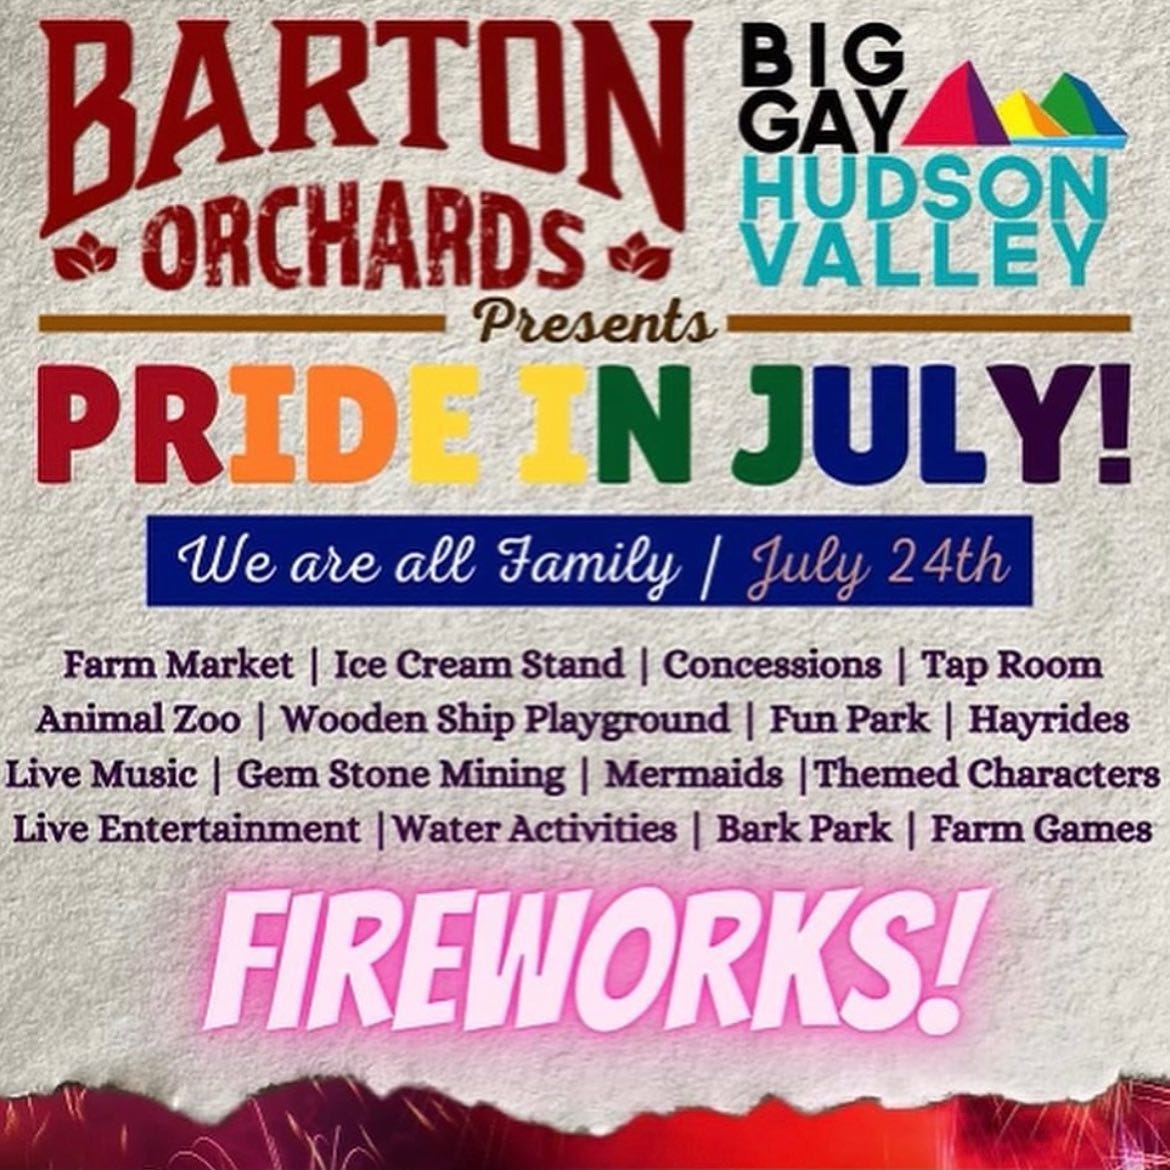 May be an image of text that says 'BARTON BIG GAYAM ORCHARDS HUDSON VALLEY Presents PRIDE IN JULY! We are all Family/ July 24th Farm Market I Ice Cream Stand Concessions Tap Room Animal Zoo Wooden Ship Playground Fun Park Hayrides Live Music Gem Stone Mining Mermaids Themed Characters Live Entertainment |Water Activities Farm Games FIREWORKS!'